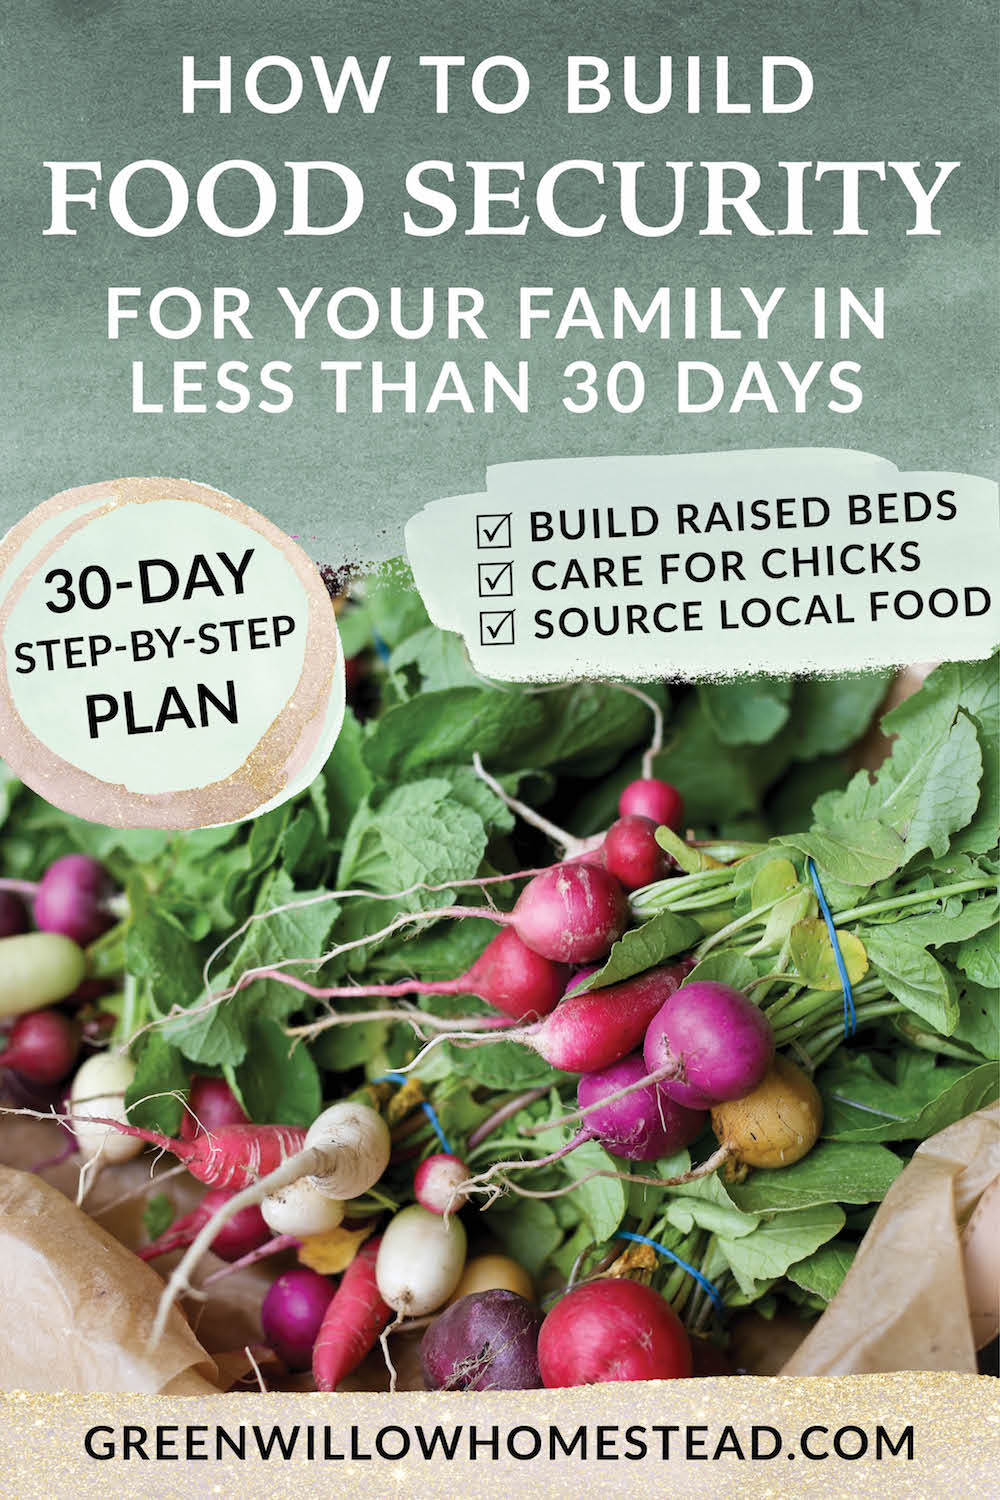 How to build food security for your family with a 30-day plan 